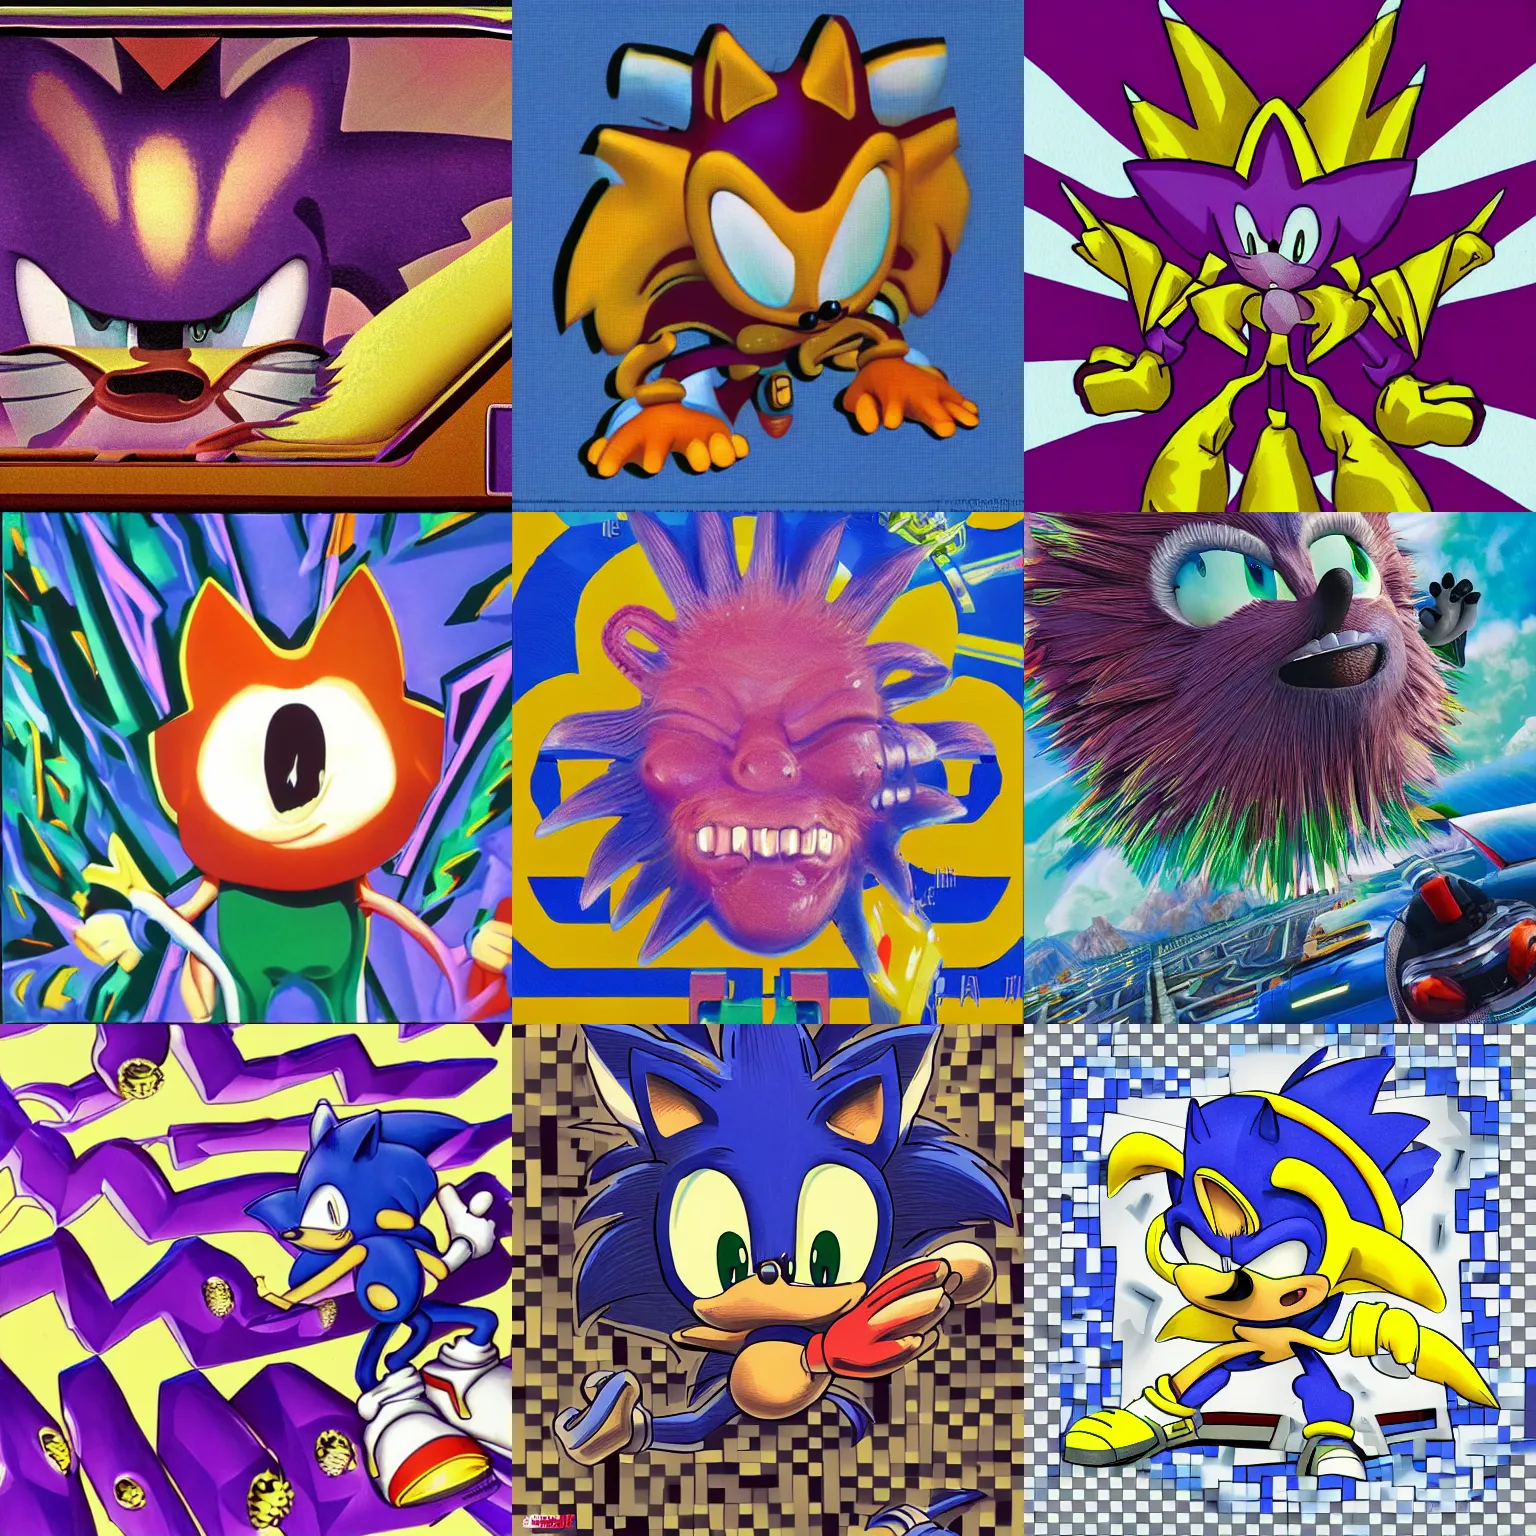 Prompt: sonic hedgehog portrait deconstructivist claymation scifi noxious matte painting lowbrow tongue surreal ruthless sonic hedgehog, airbrush art sonic the hedgehog swimming through tasteless dreams purple totally radical squeamish checkerboard background 1 9 9 0 s 1 9 9 2 sega genesis